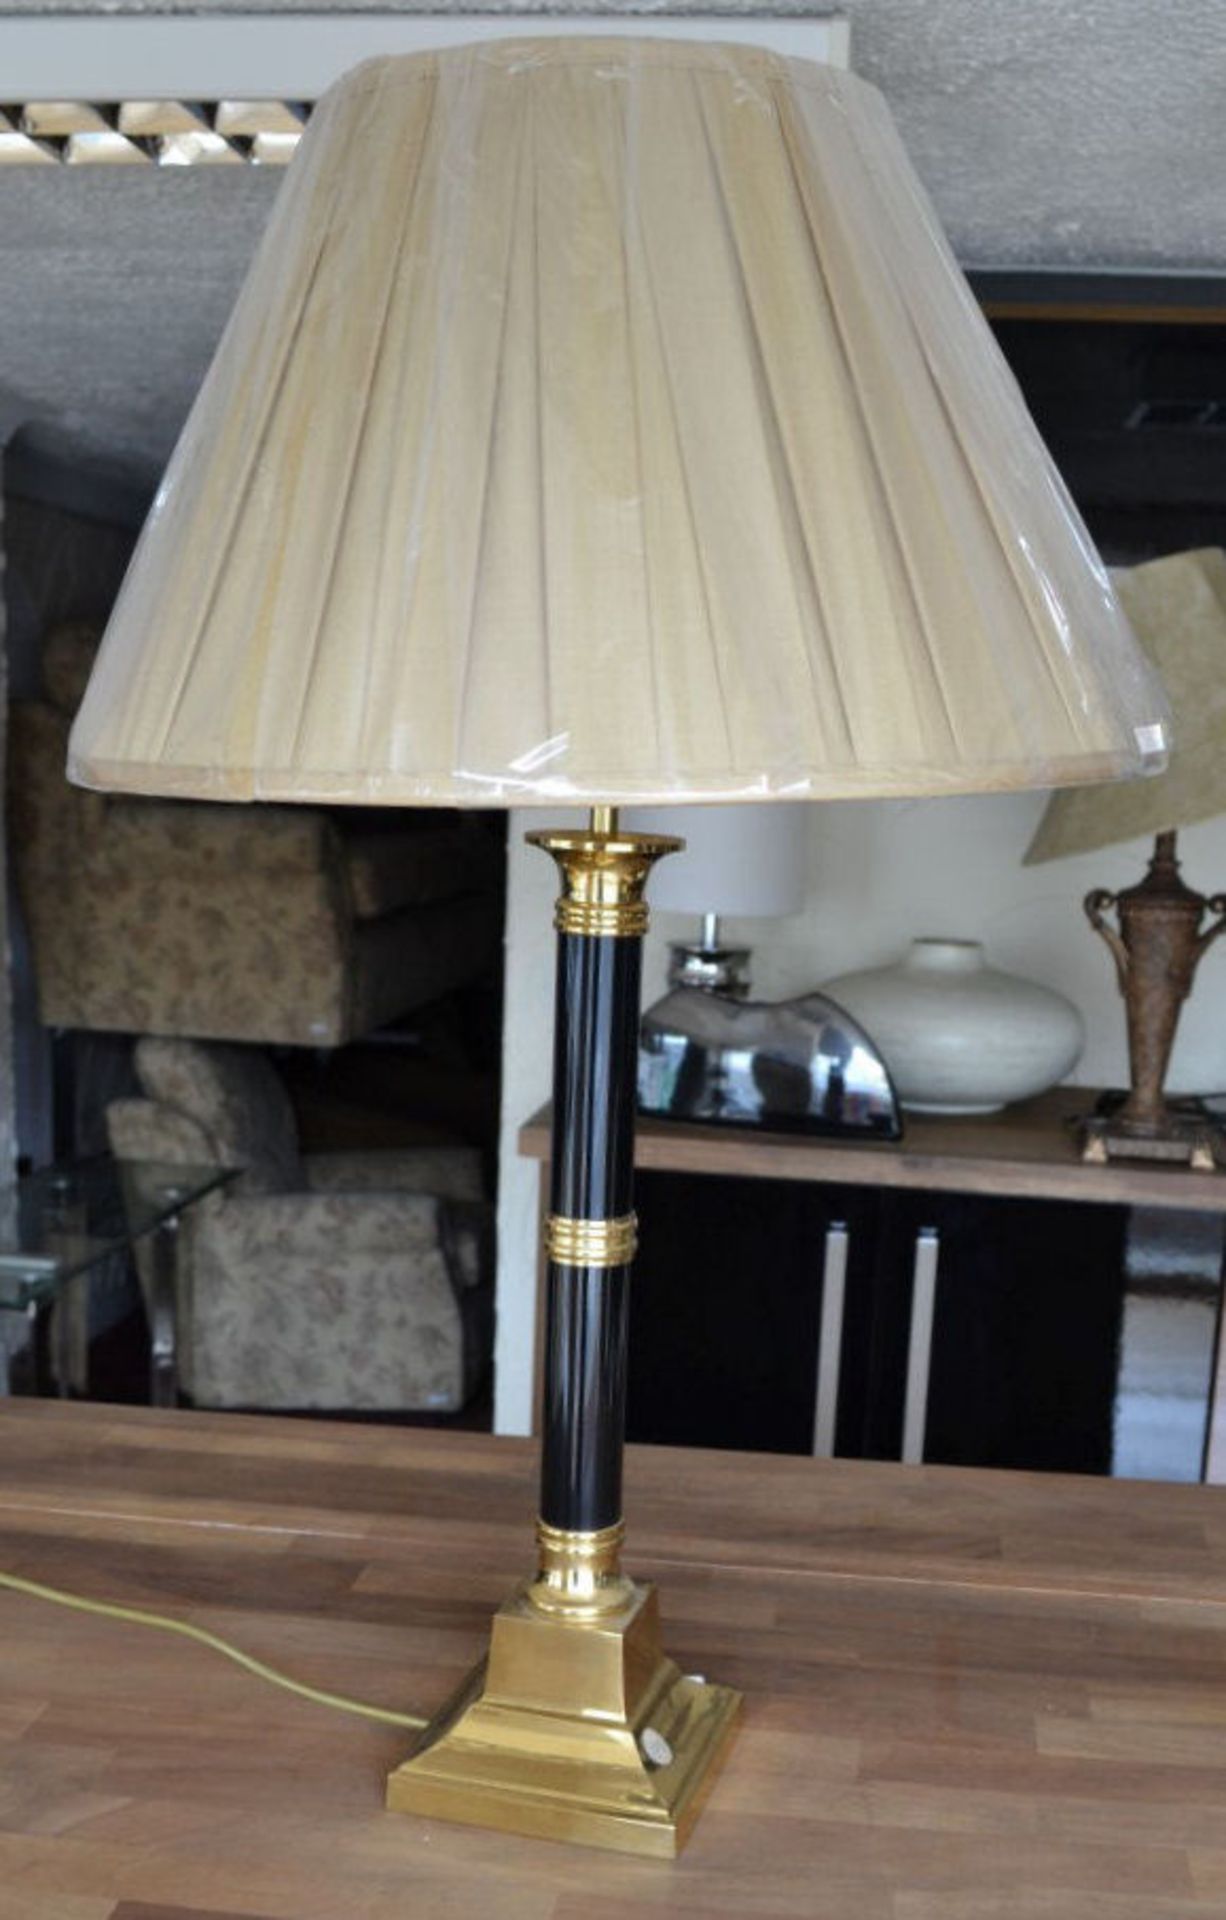 1 x Classical Gold And Black Column Lamp With Cream Shade - Image 2 of 4